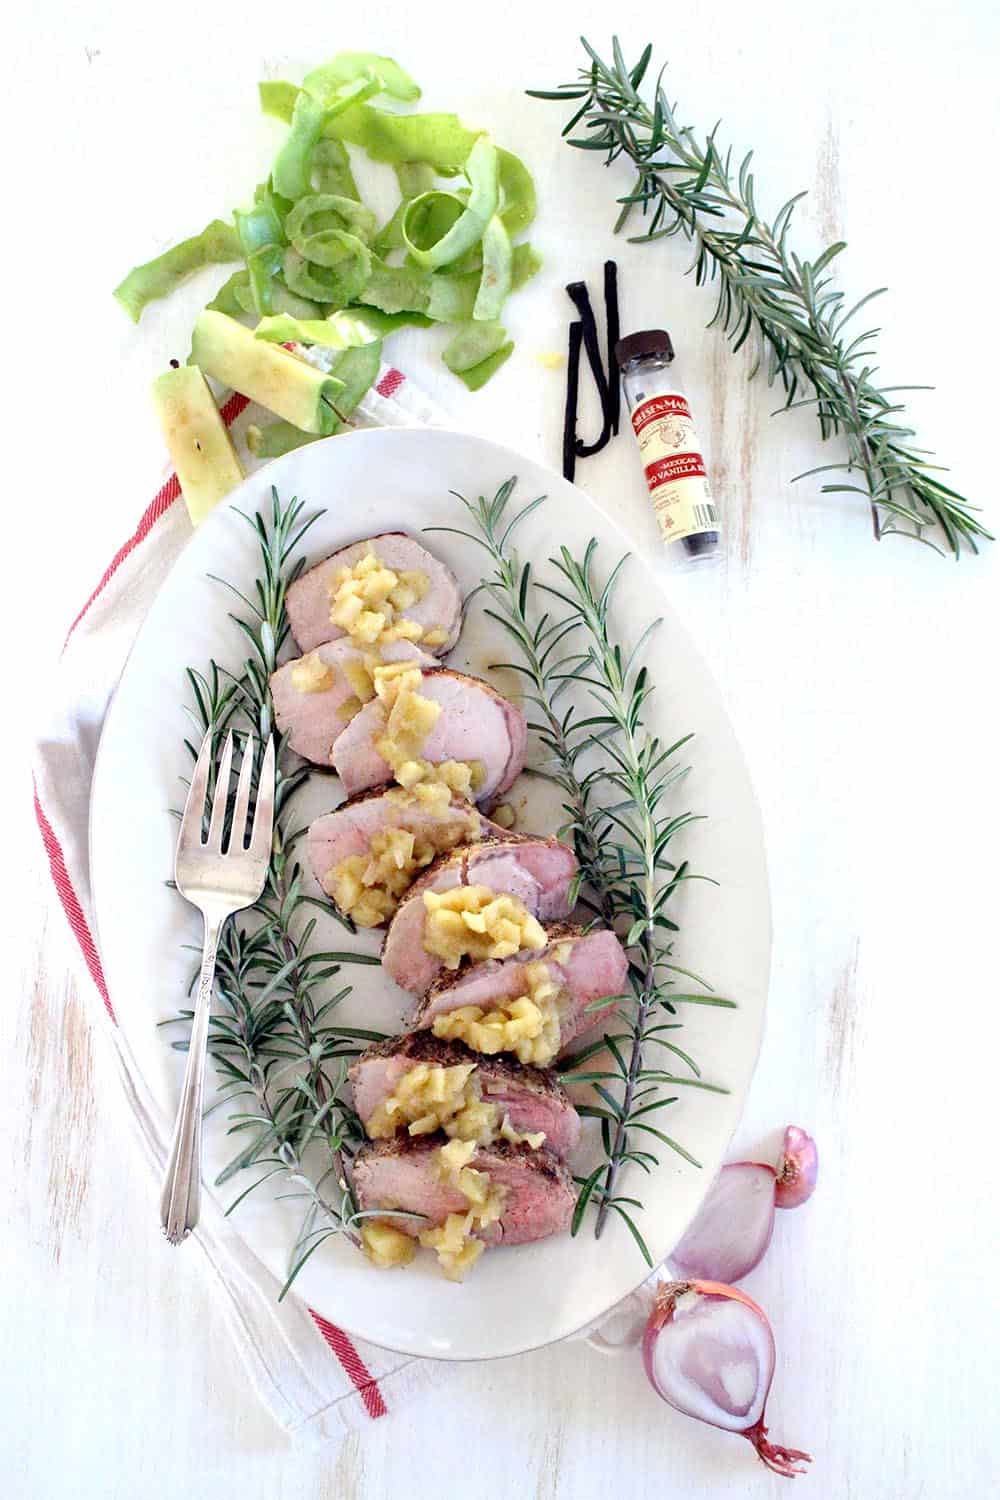 This Roast Pork Tenderloin with Vanilla Apple Chutney is an elegant yet simple, quick, and easy main dish that's perfect for your holiday feast or a weeknight dinner! The pork is juicy and the apple chutney, made with vanilla bean, is tart, slightly sweet, and earthy. #PorkTenderloin #AppleChutney #Paleo